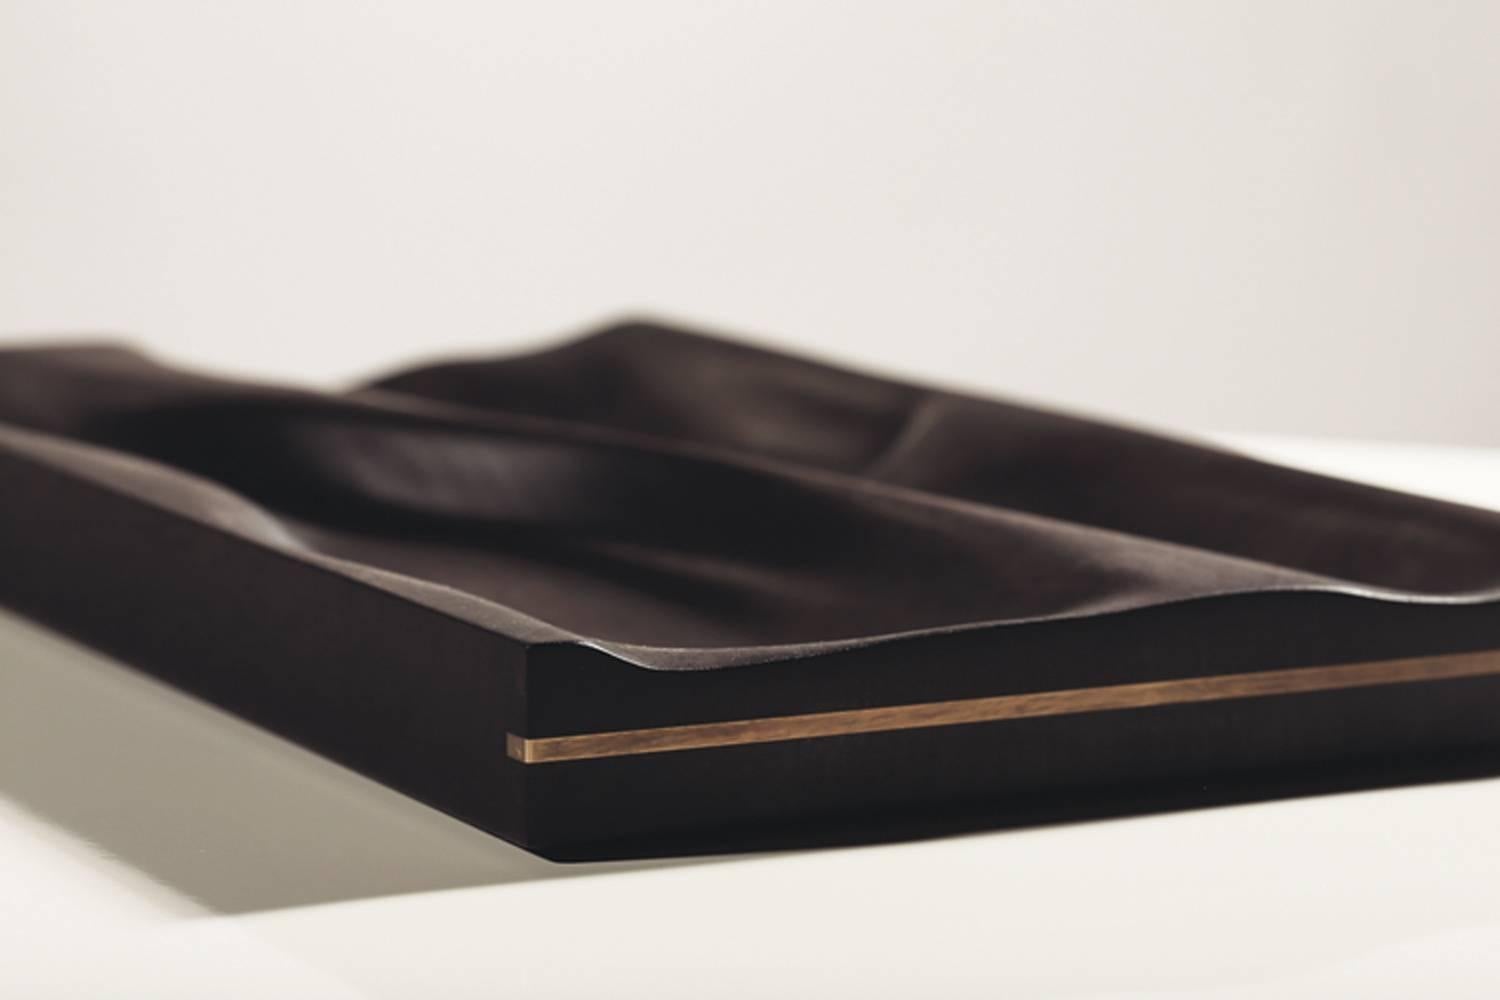 Contemporary ebonized tray by Vincent Pocsik

Carved walnut tray with ebonized finish.

Natural food safe oil and wax finish.

Vincent Pocsik finds the balance between old and new fabrication techniques working in conjunction to find an